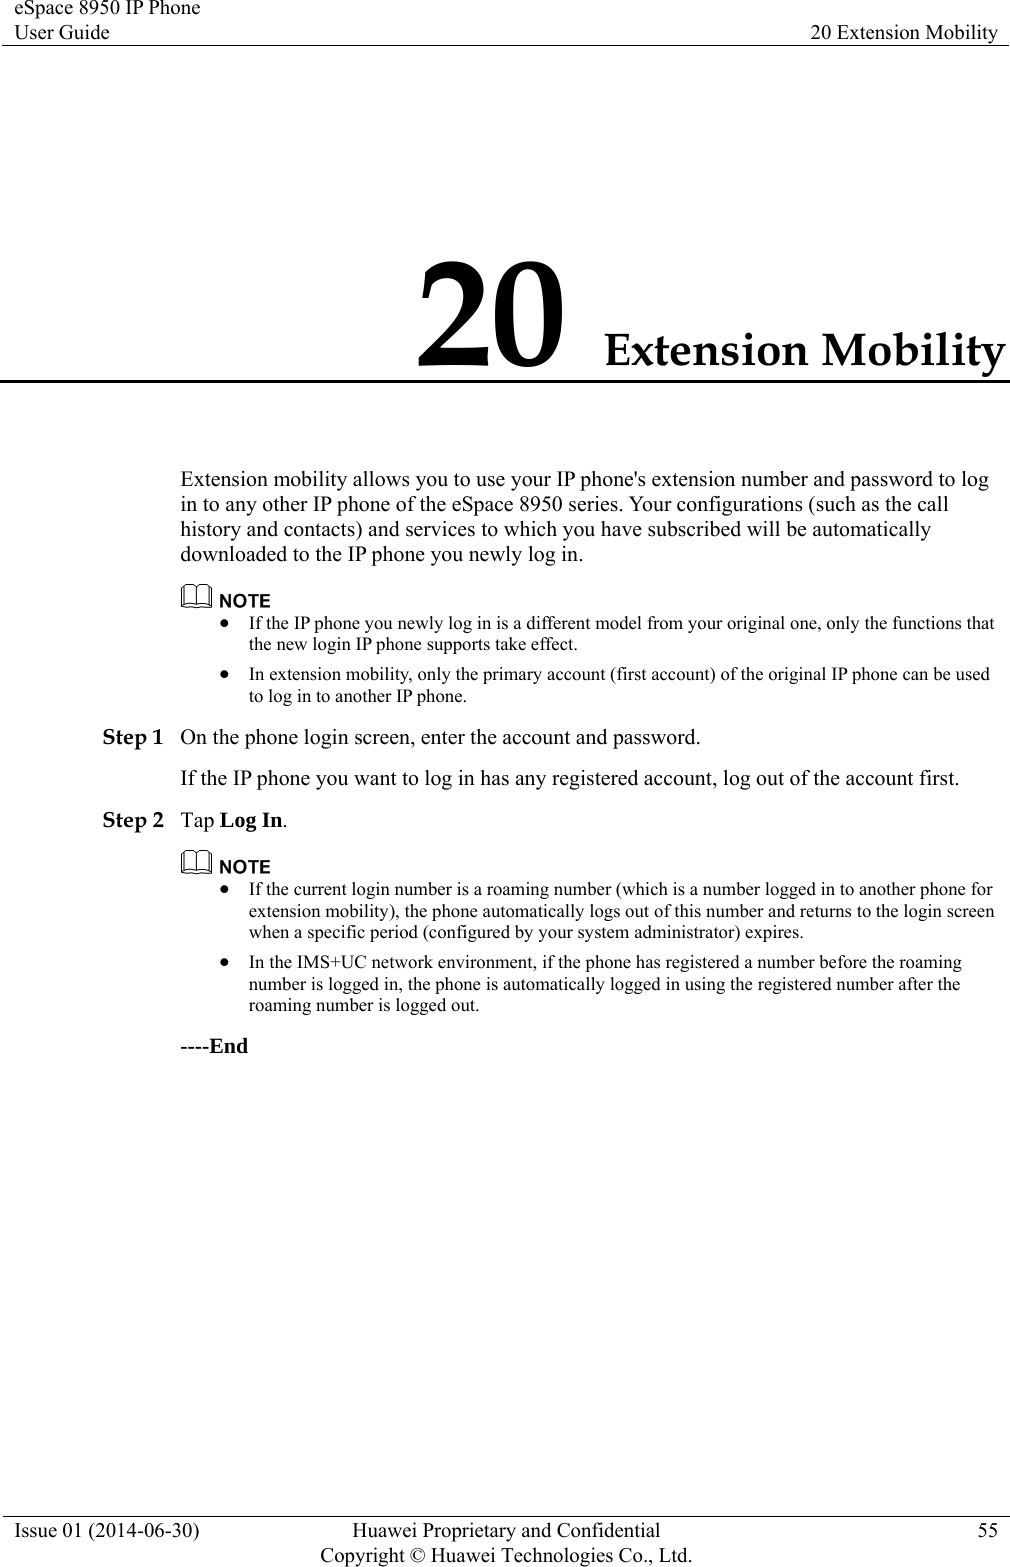 eSpace 8950 IP Phone User Guide  20 Extension Mobility Issue 01 (2014-06-30)  Huawei Proprietary and Confidential         Copyright © Huawei Technologies Co., Ltd.55 20 Extension Mobility Extension mobility allows you to use your IP phone&apos;s extension number and password to log in to any other IP phone of the eSpace 8950 series. Your configurations (such as the call history and contacts) and services to which you have subscribed will be automatically downloaded to the IP phone you newly log in.   If the IP phone you newly log in is a different model from your original one, only the functions that the new login IP phone supports take effect.  In extension mobility, only the primary account (first account) of the original IP phone can be used to log in to another IP phone. Step 1 On the phone login screen, enter the account and password. If the IP phone you want to log in has any registered account, log out of the account first. Step 2 Tap Log In.   If the current login number is a roaming number (which is a number logged in to another phone for extension mobility), the phone automatically logs out of this number and returns to the login screen when a specific period (configured by your system administrator) expires.  In the IMS+UC network environment, if the phone has registered a number before the roaming number is logged in, the phone is automatically logged in using the registered number after the roaming number is logged out. ----End 